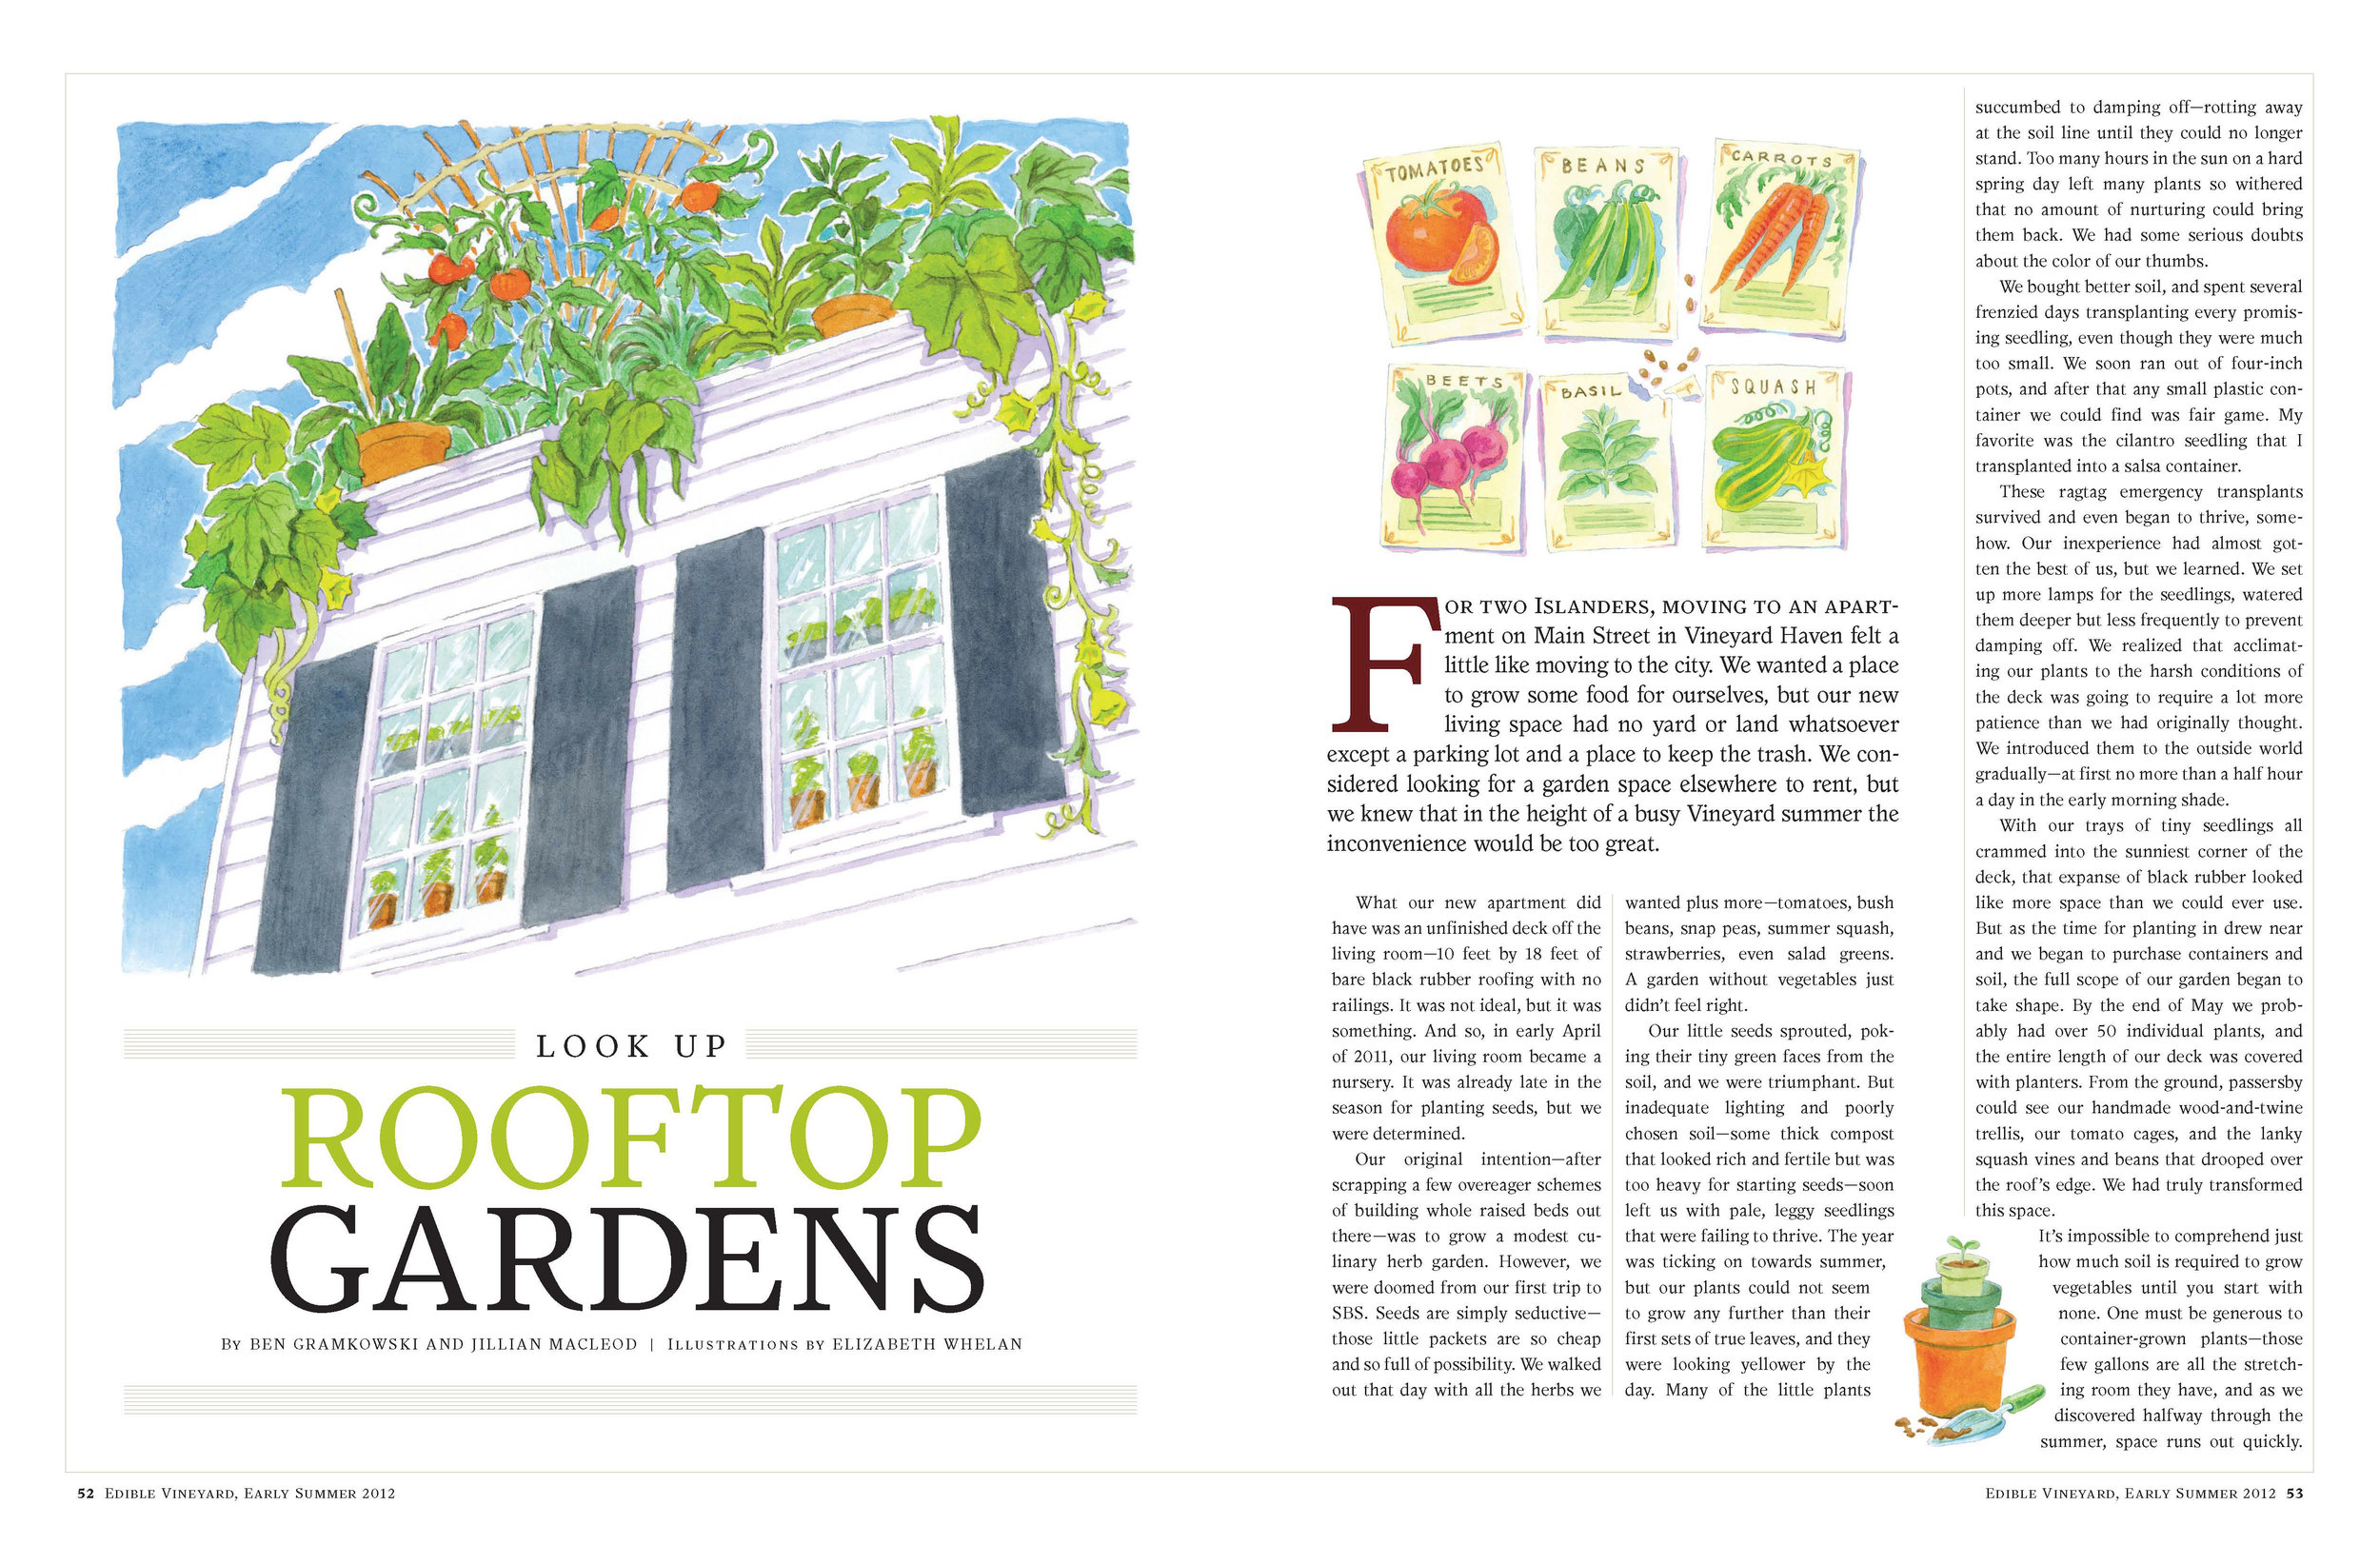 Rooftop Gardens feature opening spread